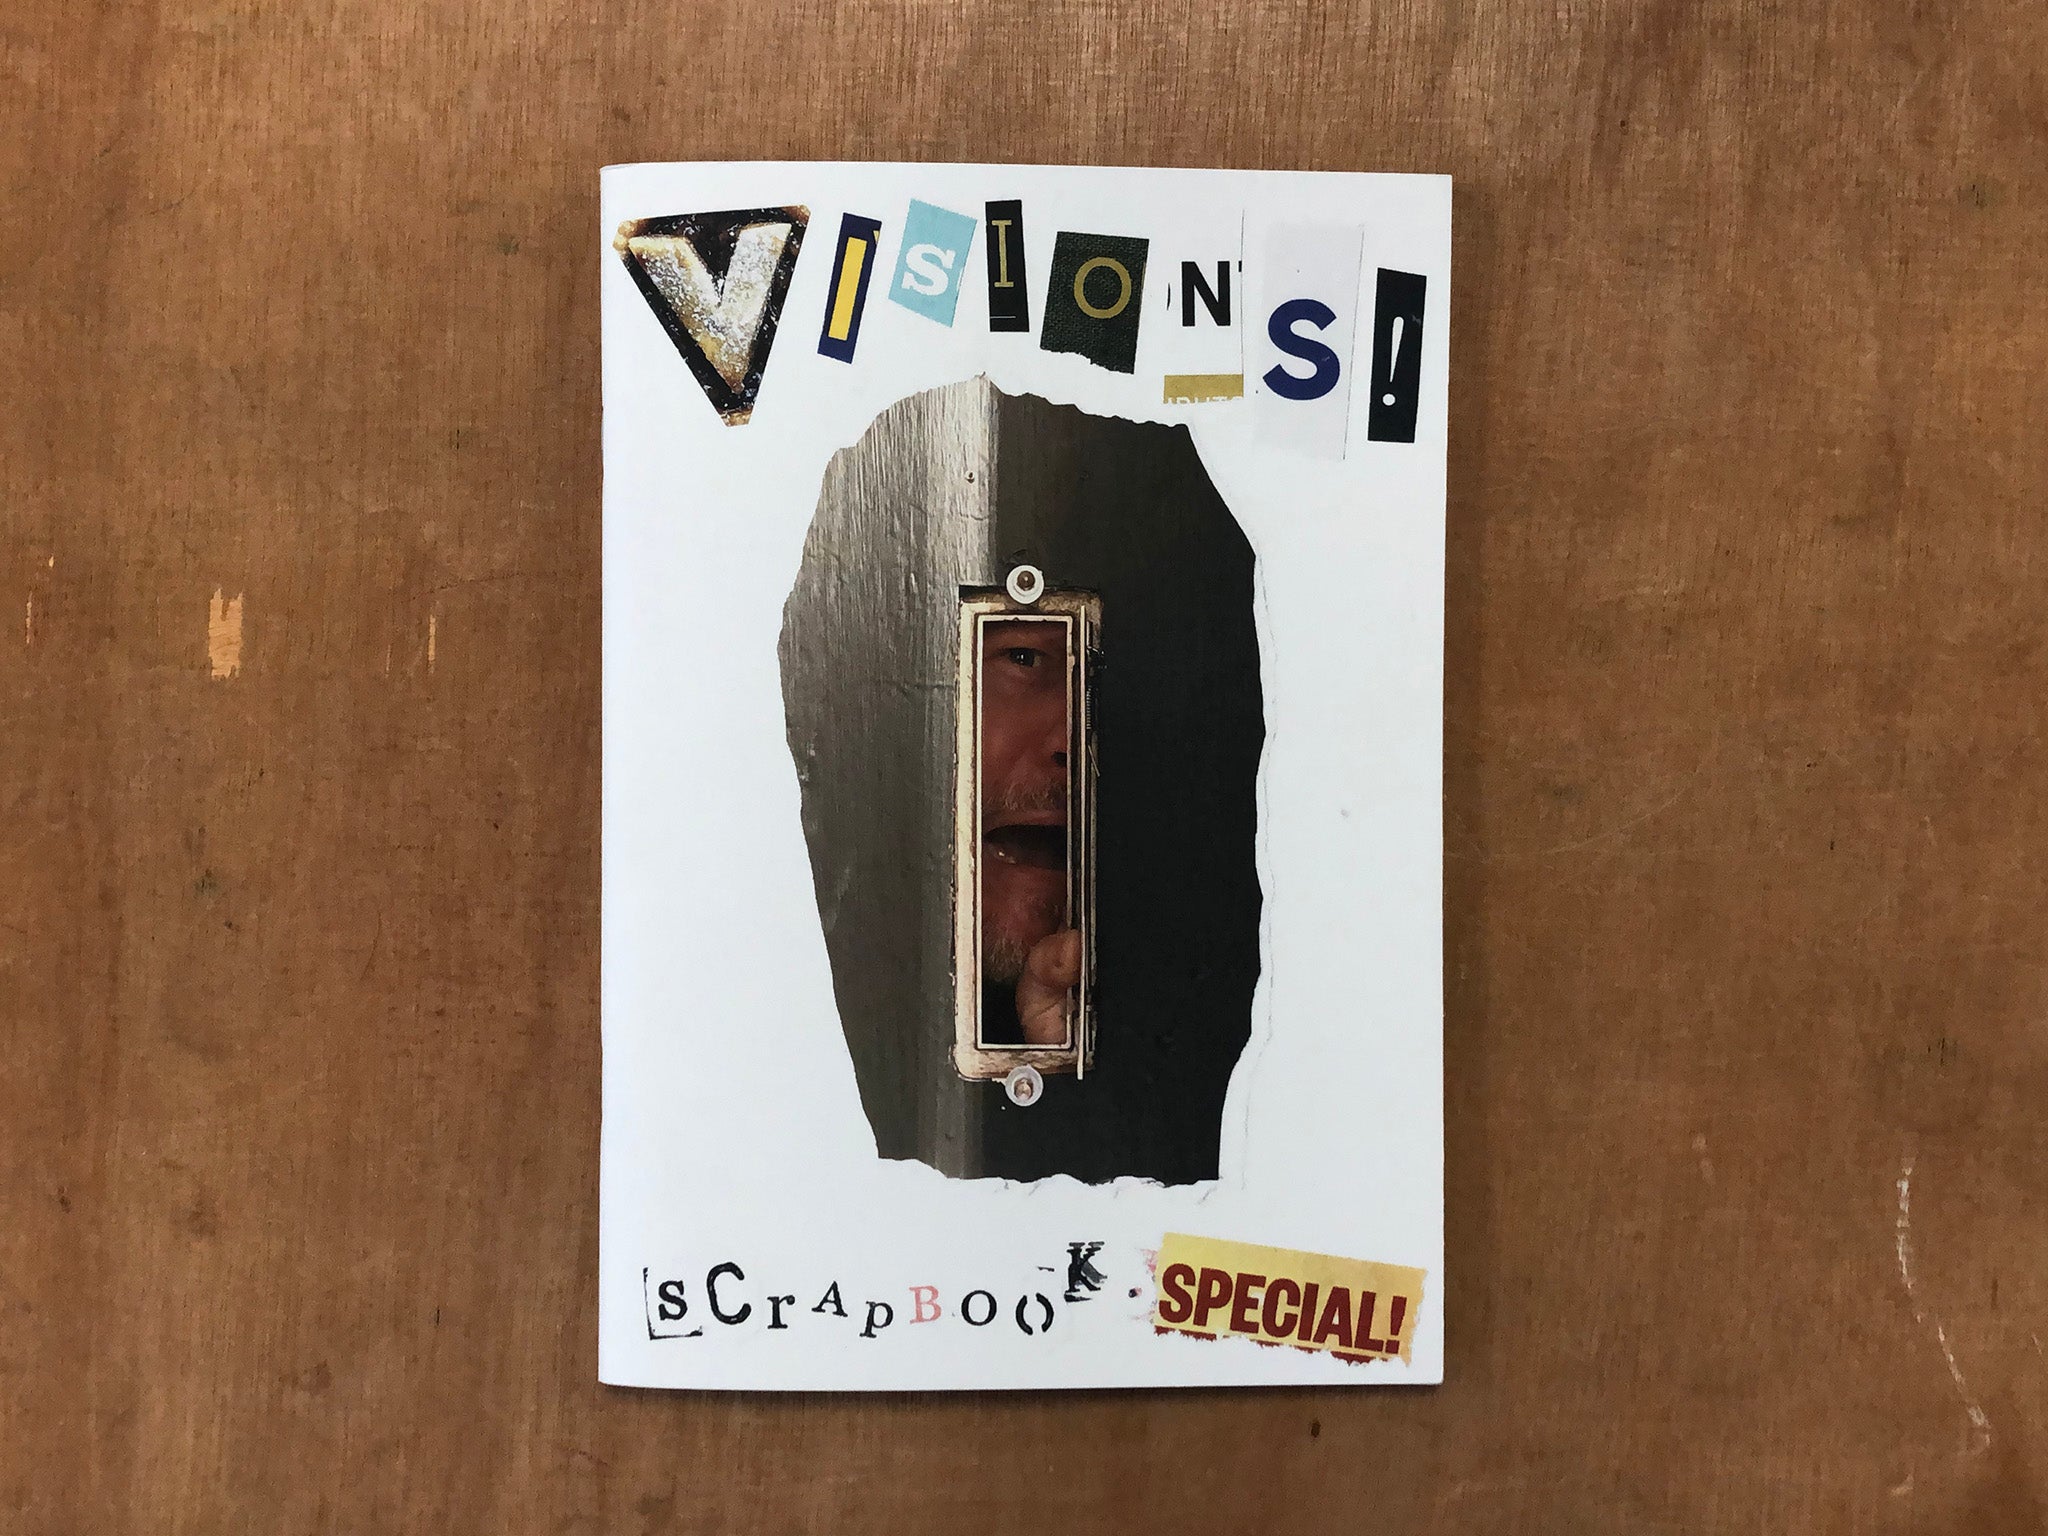 VISIONS, SCRAPBOOK SPECIAL by Dave Emmerson